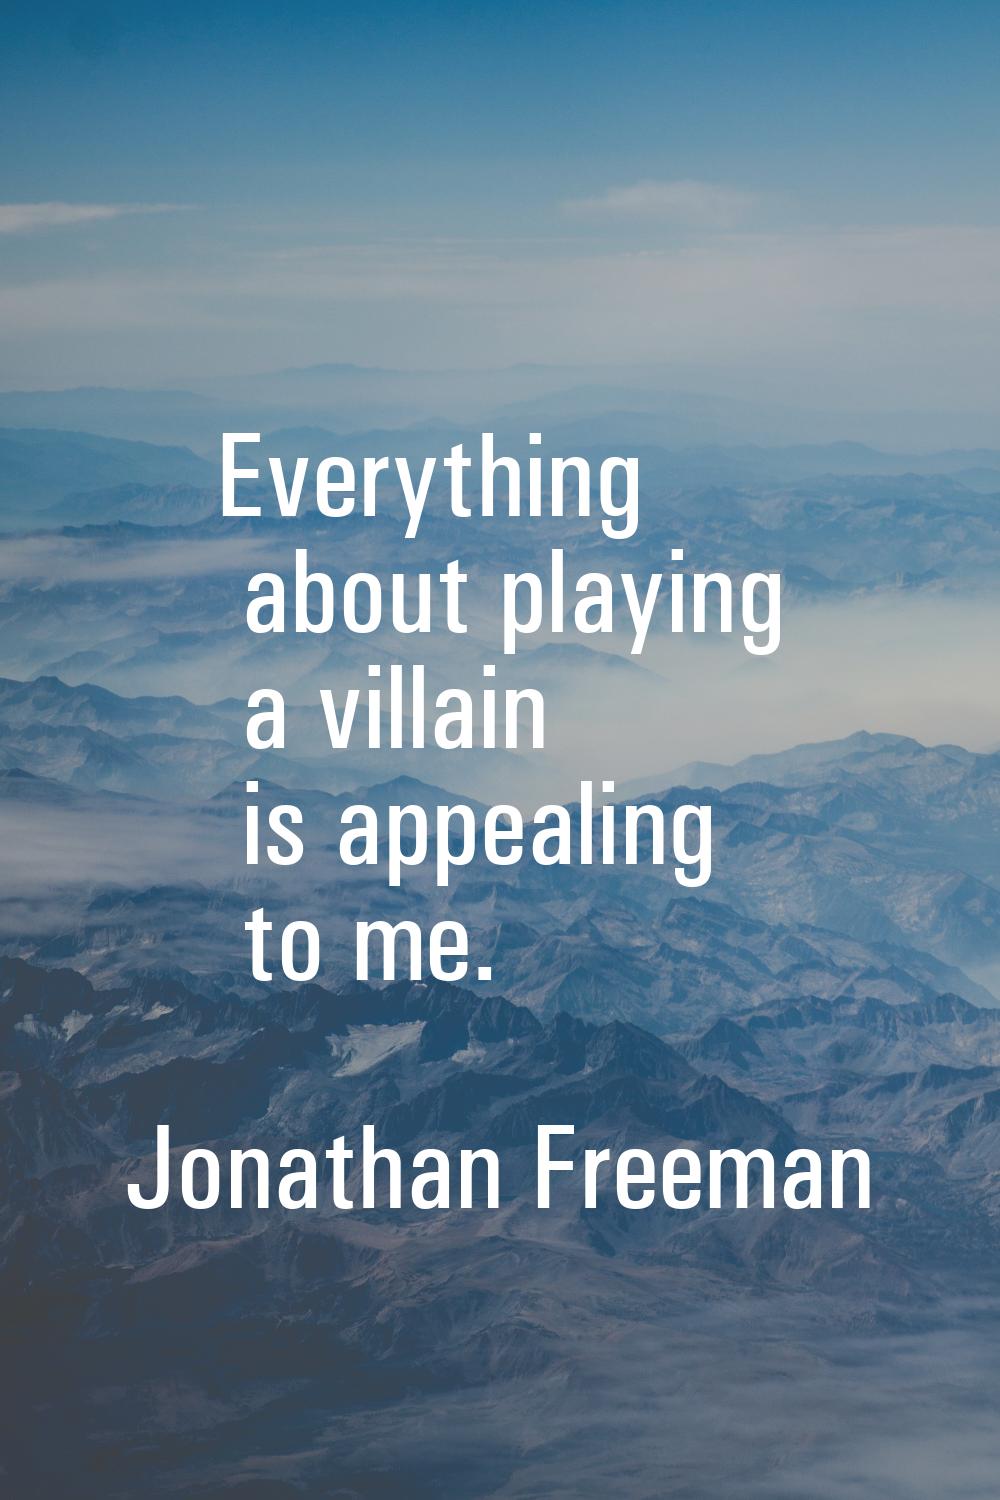 Everything about playing a villain is appealing to me.